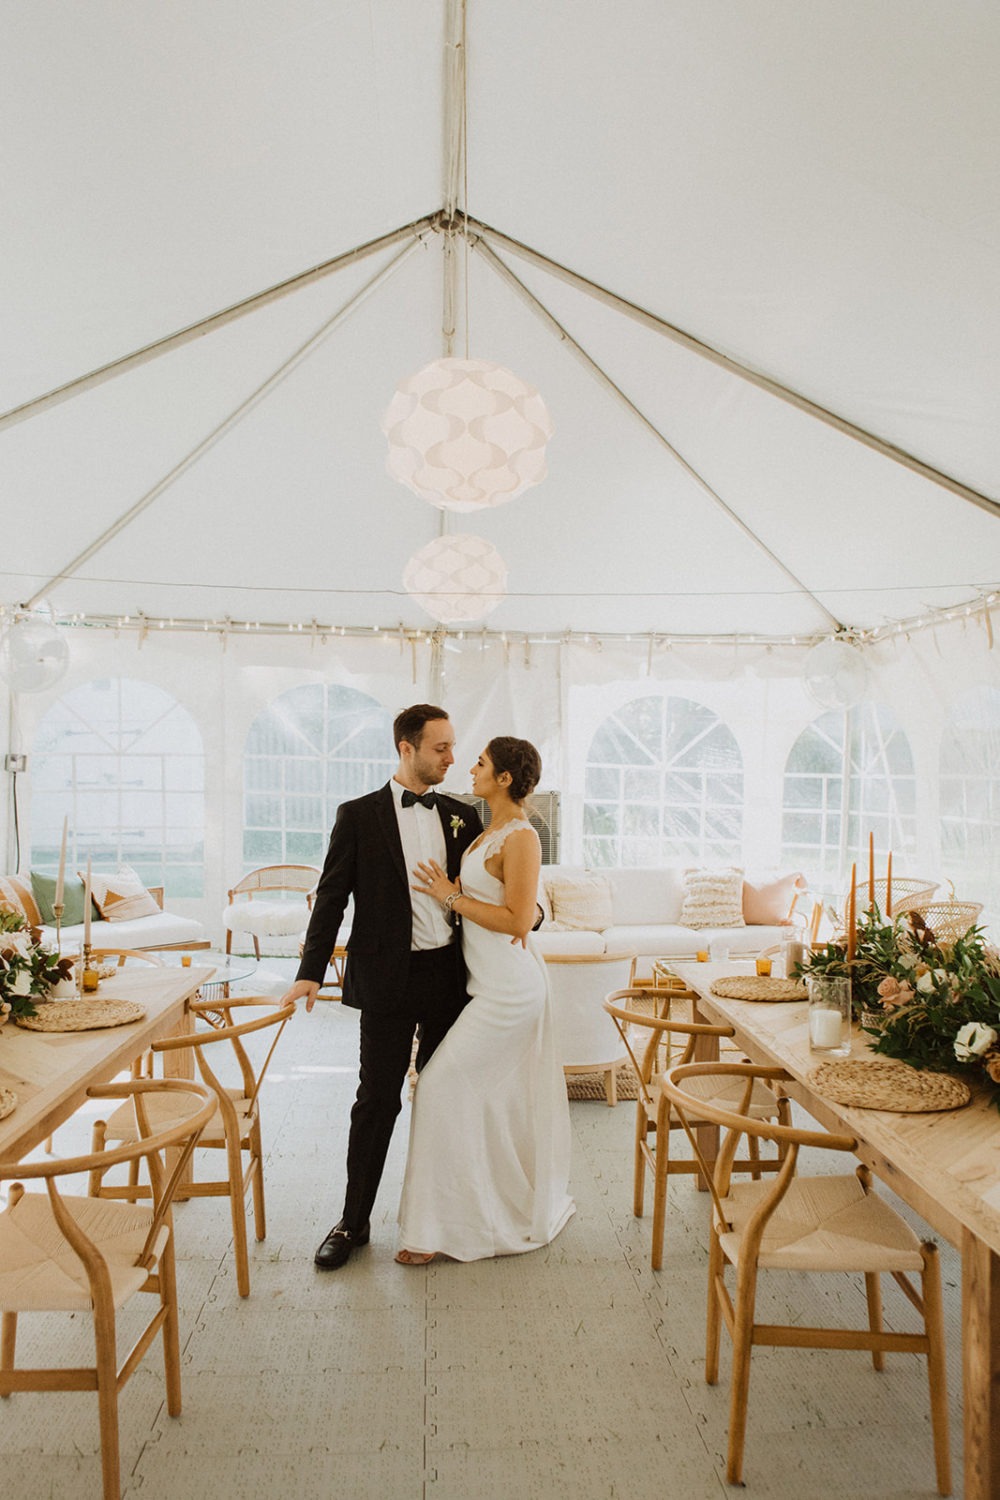 Couple stands in tented reception at backyard wedding